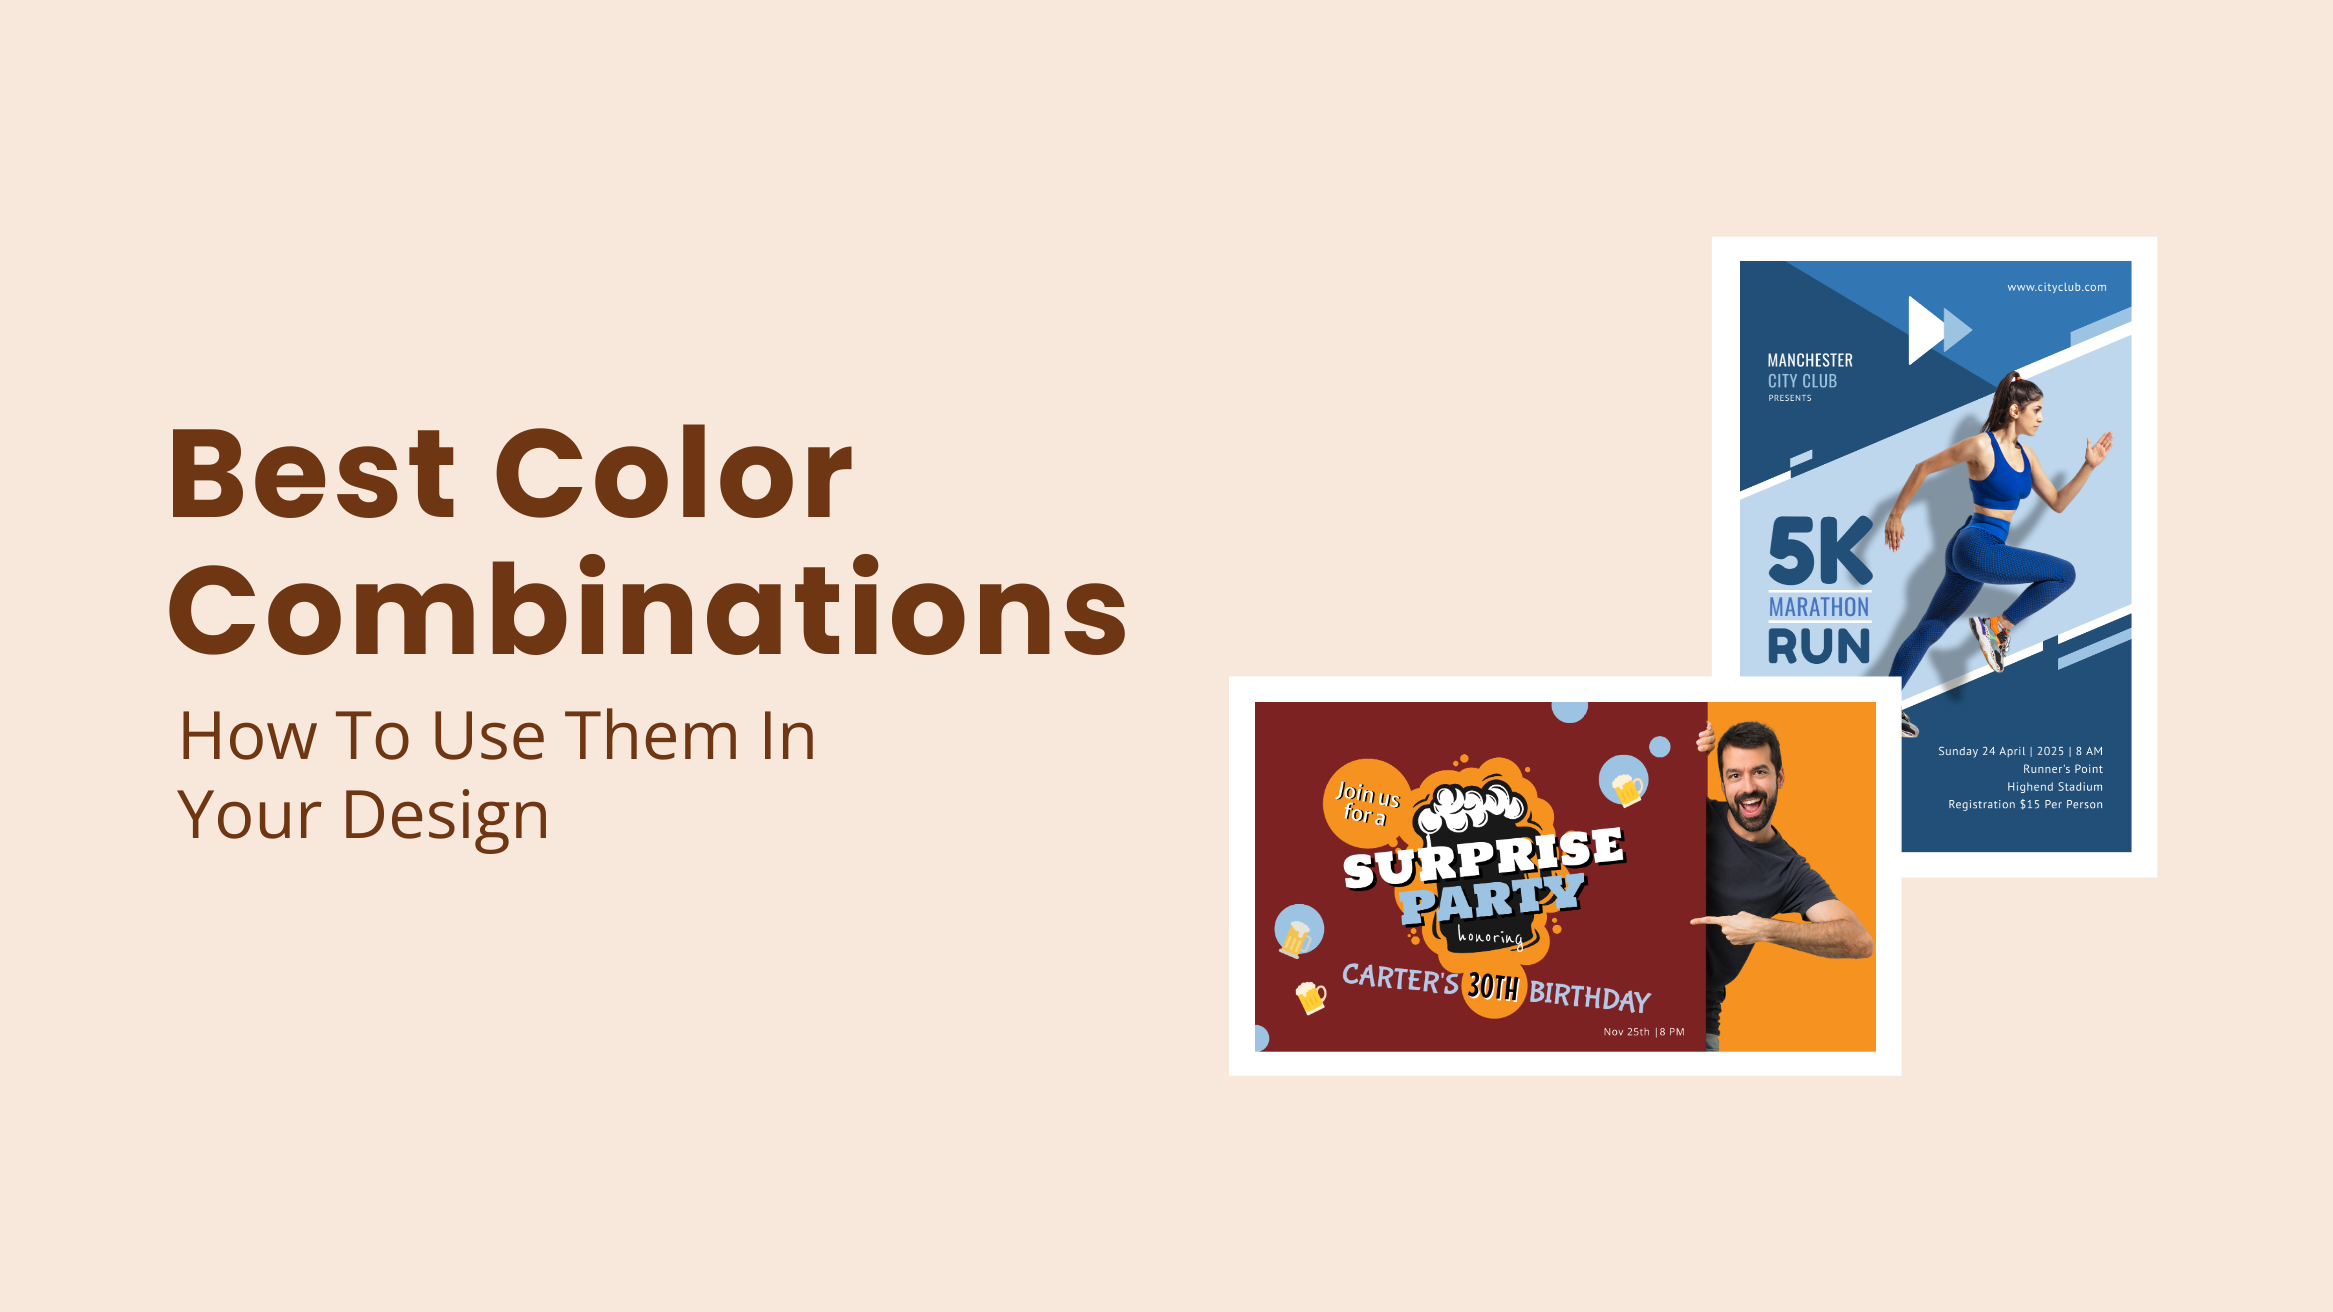 Best Color Combinations And How To Use Them In Your Design